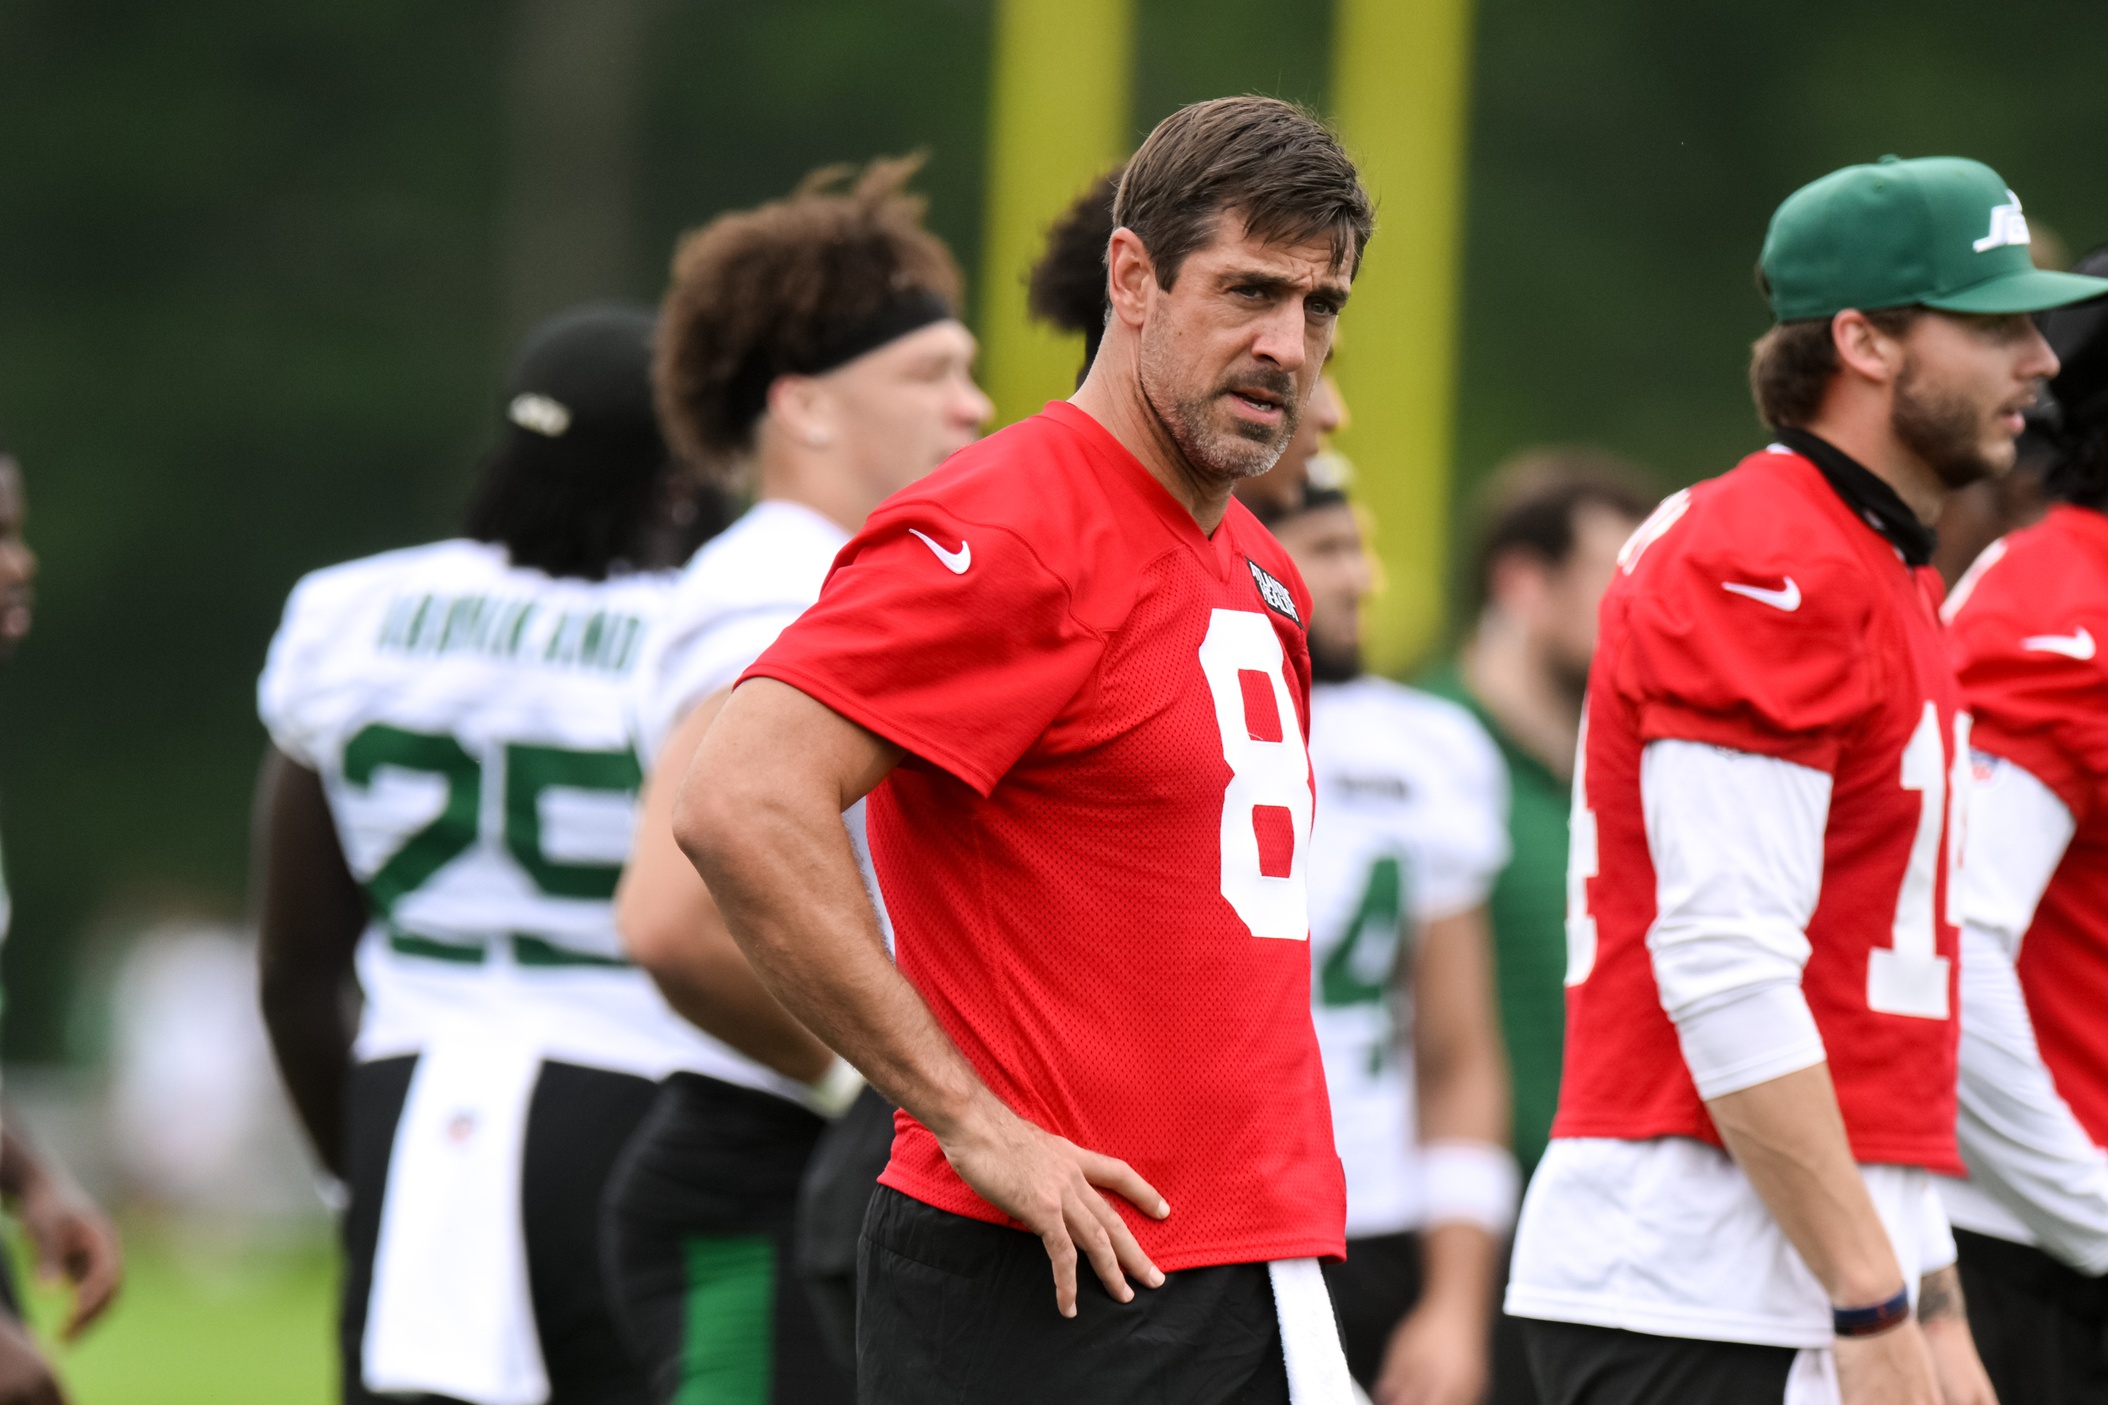 NY Jets Training Camp (Day 3); Aaron Rodgers Shines Again